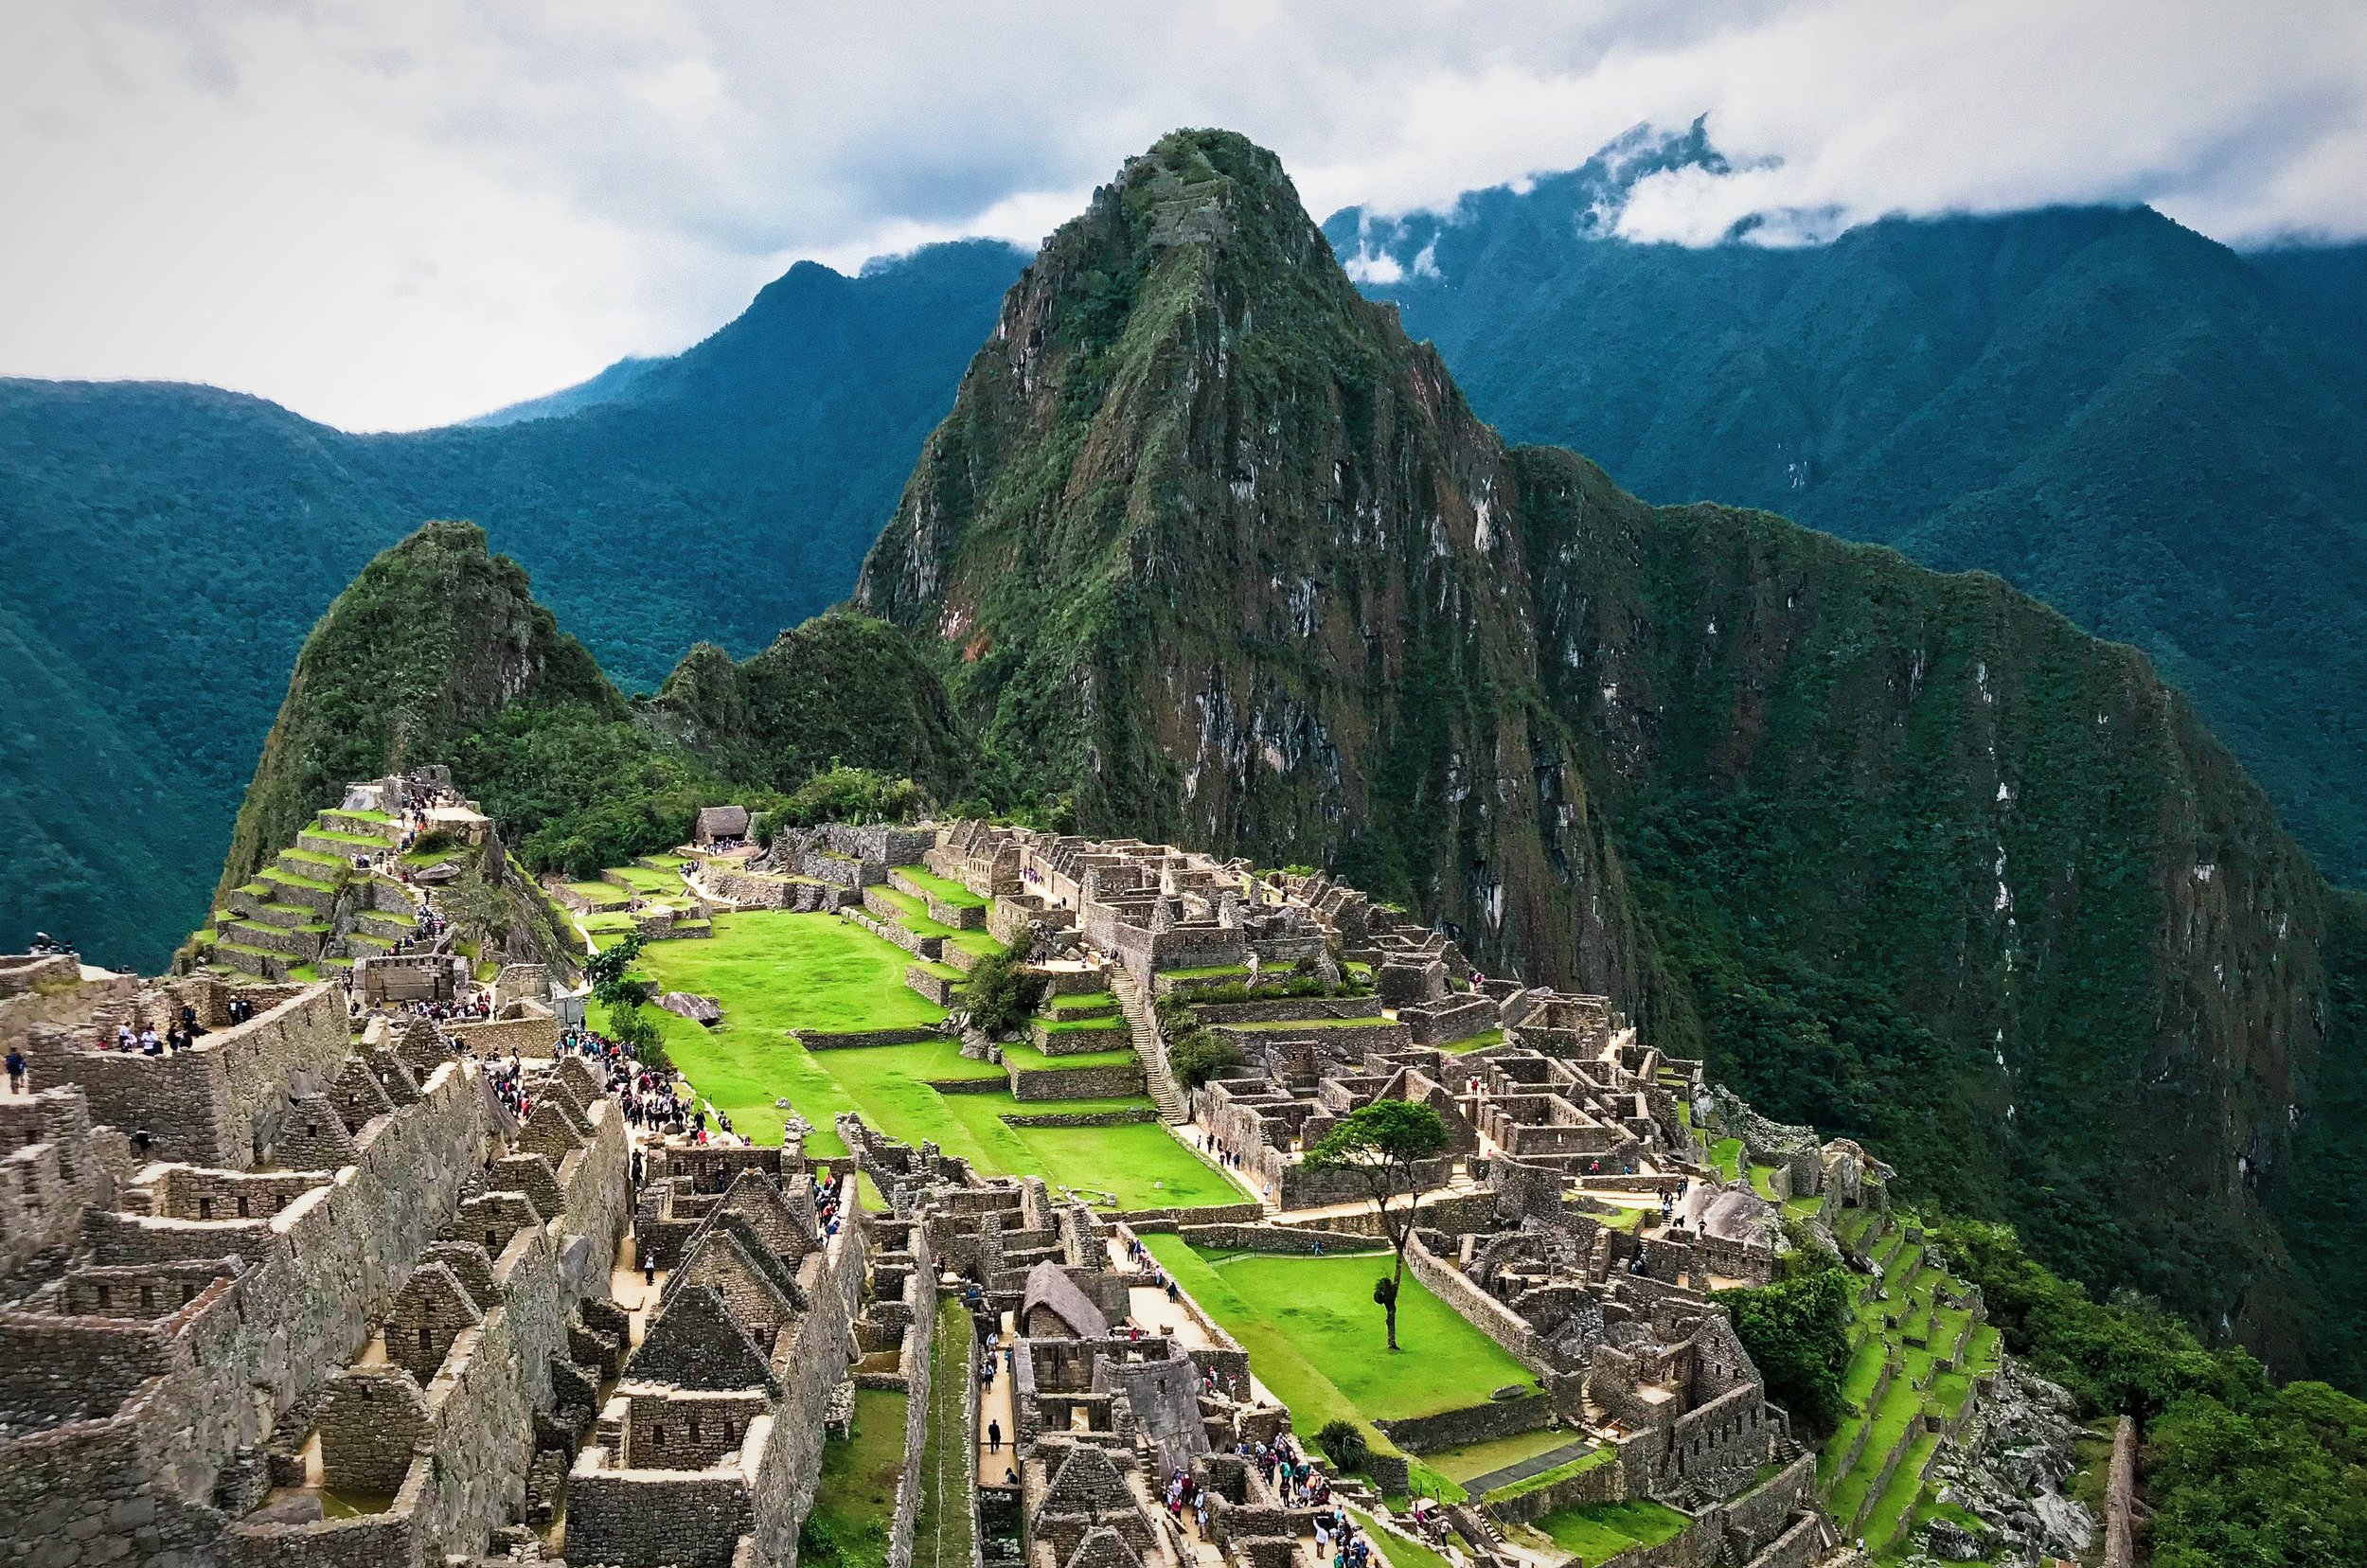 Summit Huayna Picchu to have incredible aerial views of the Incan City Machu Picchu and the lush surrounding mountains